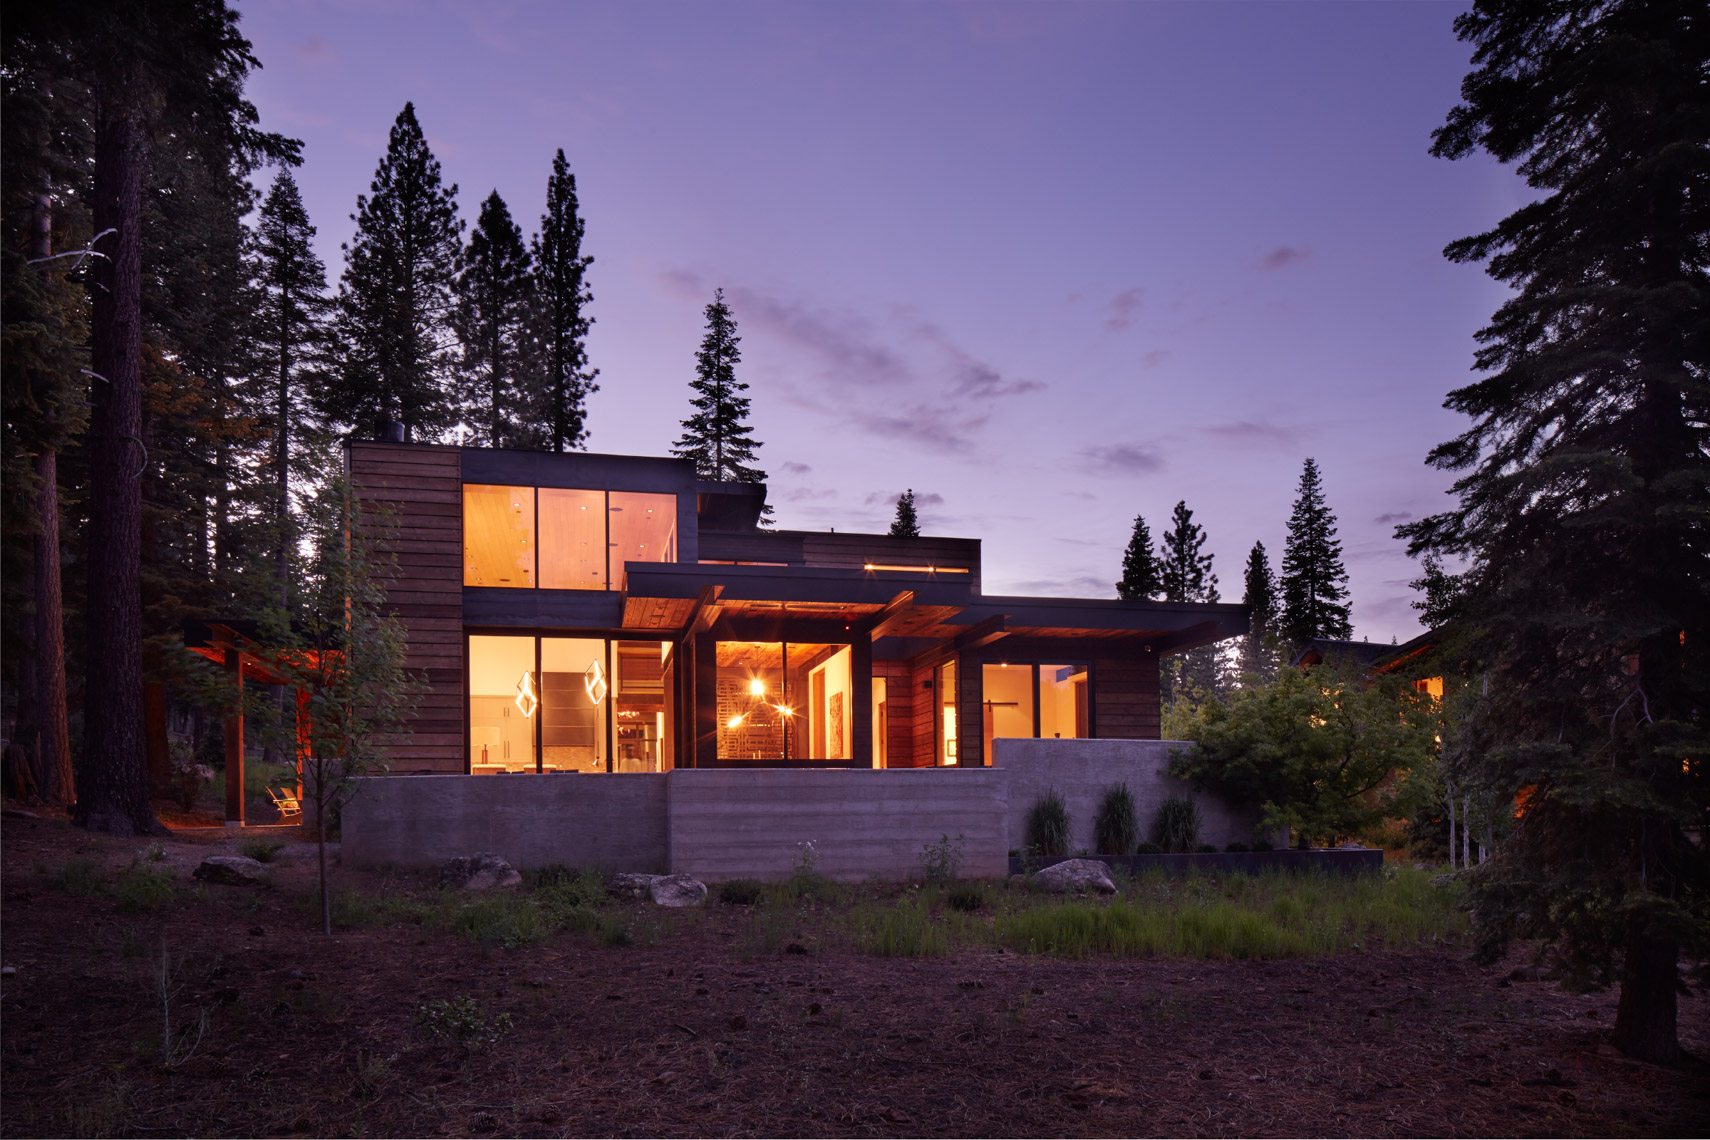 Glowing mountain home at dusk with purple sky San Francisco architectural photographer